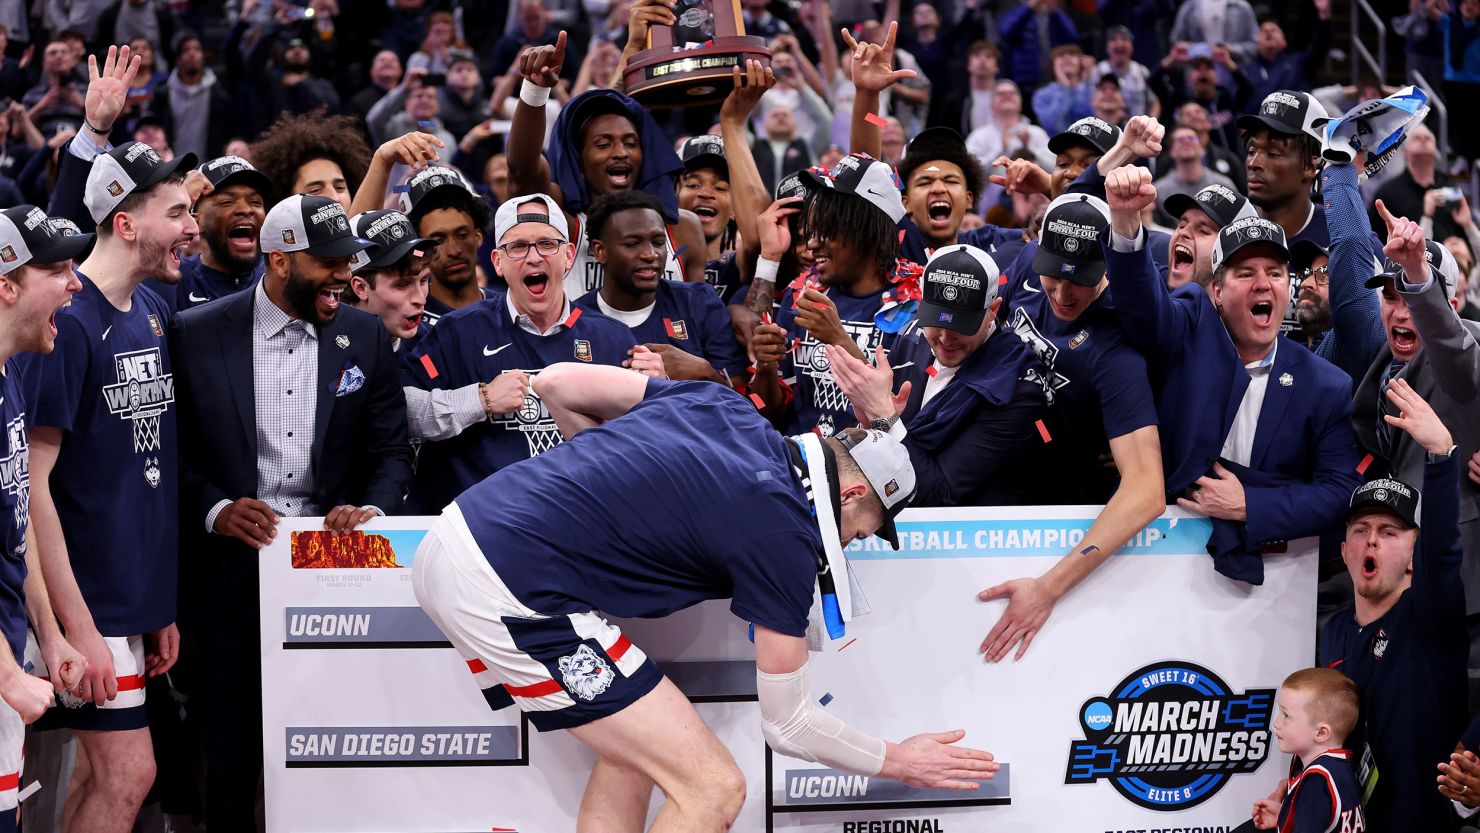 The UConn Huskies are aiming for back-to-back NCAA men's national championship titles.